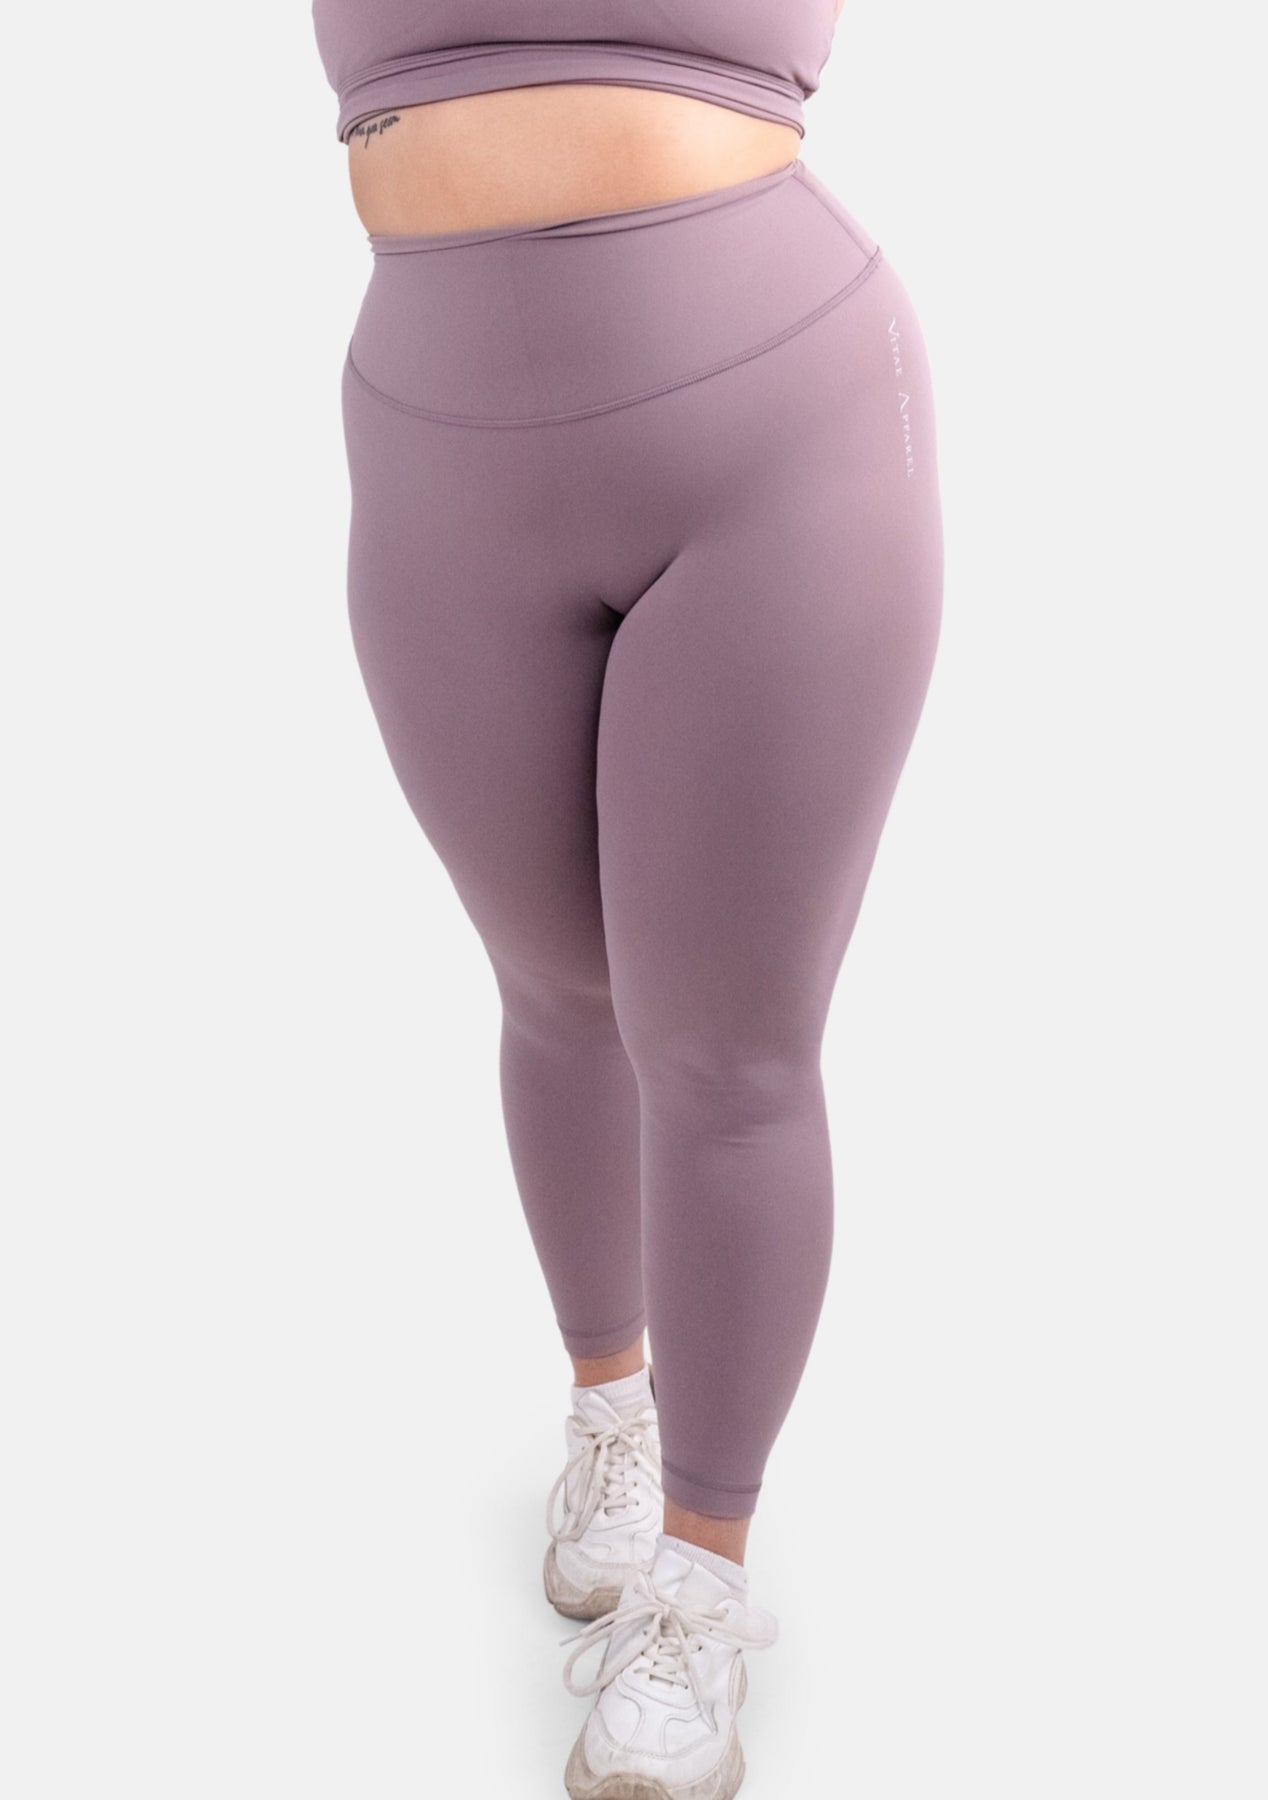 Yoga Pants - Extra Long (Misses and Misses Plus Sizes) - VF-Sport